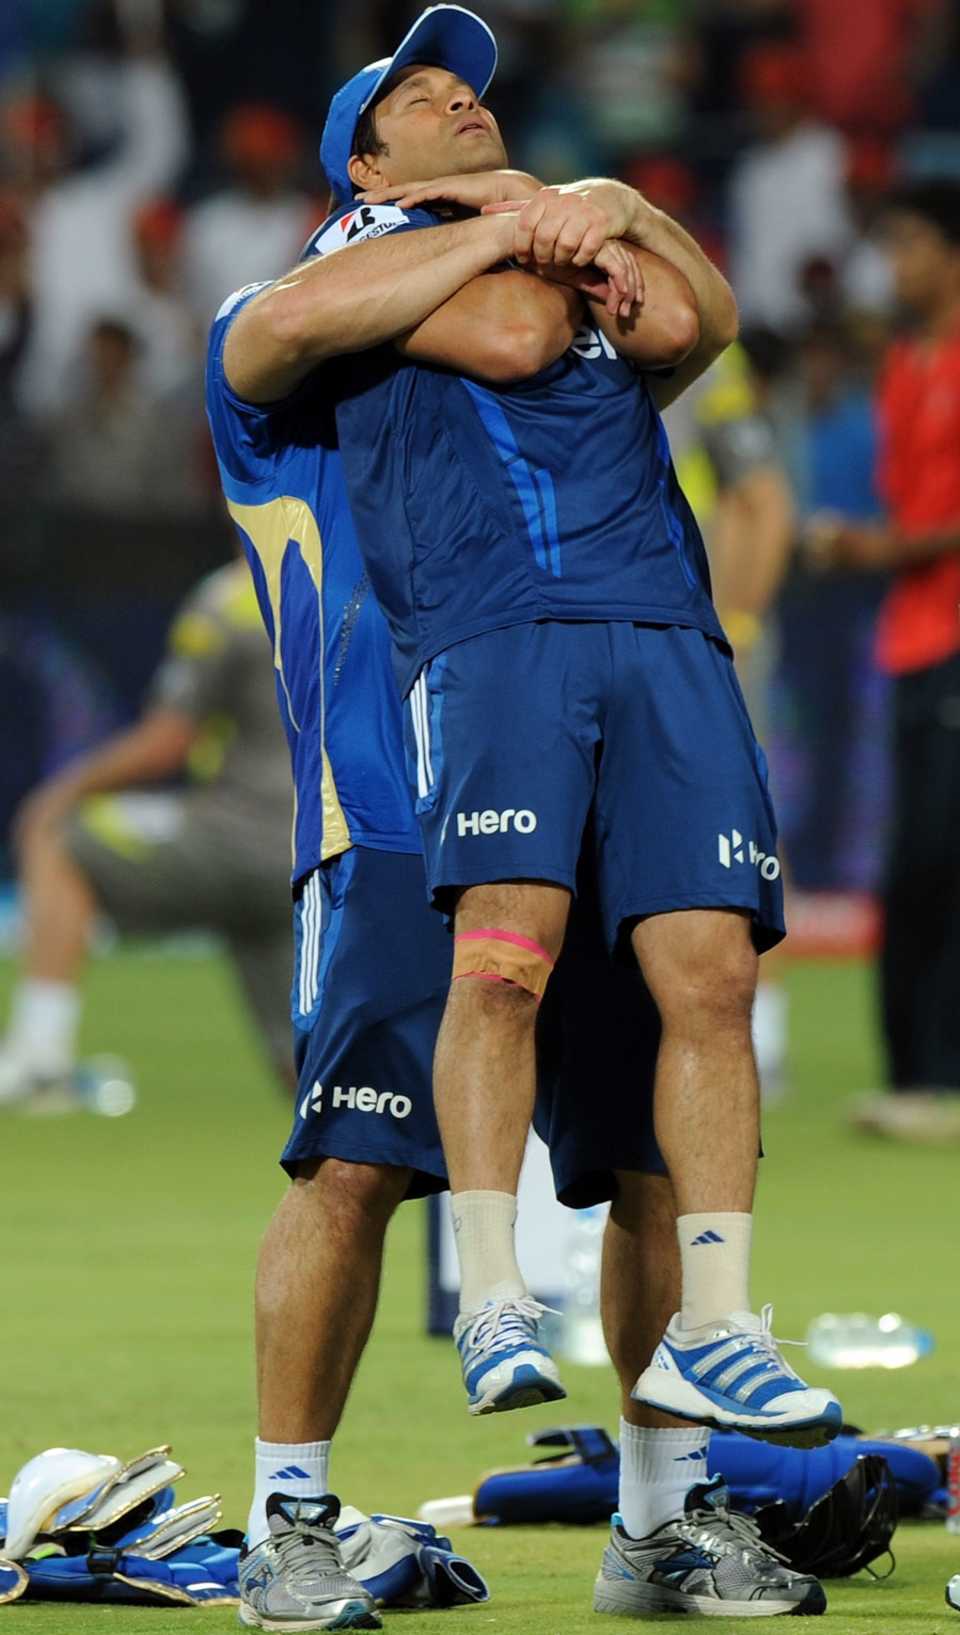 Sachin Tendulkar warms up with a trainer ahead of the match against Pune, Pune Warriors v Mumbai Indians, IPL, Pune, May 3, 2012